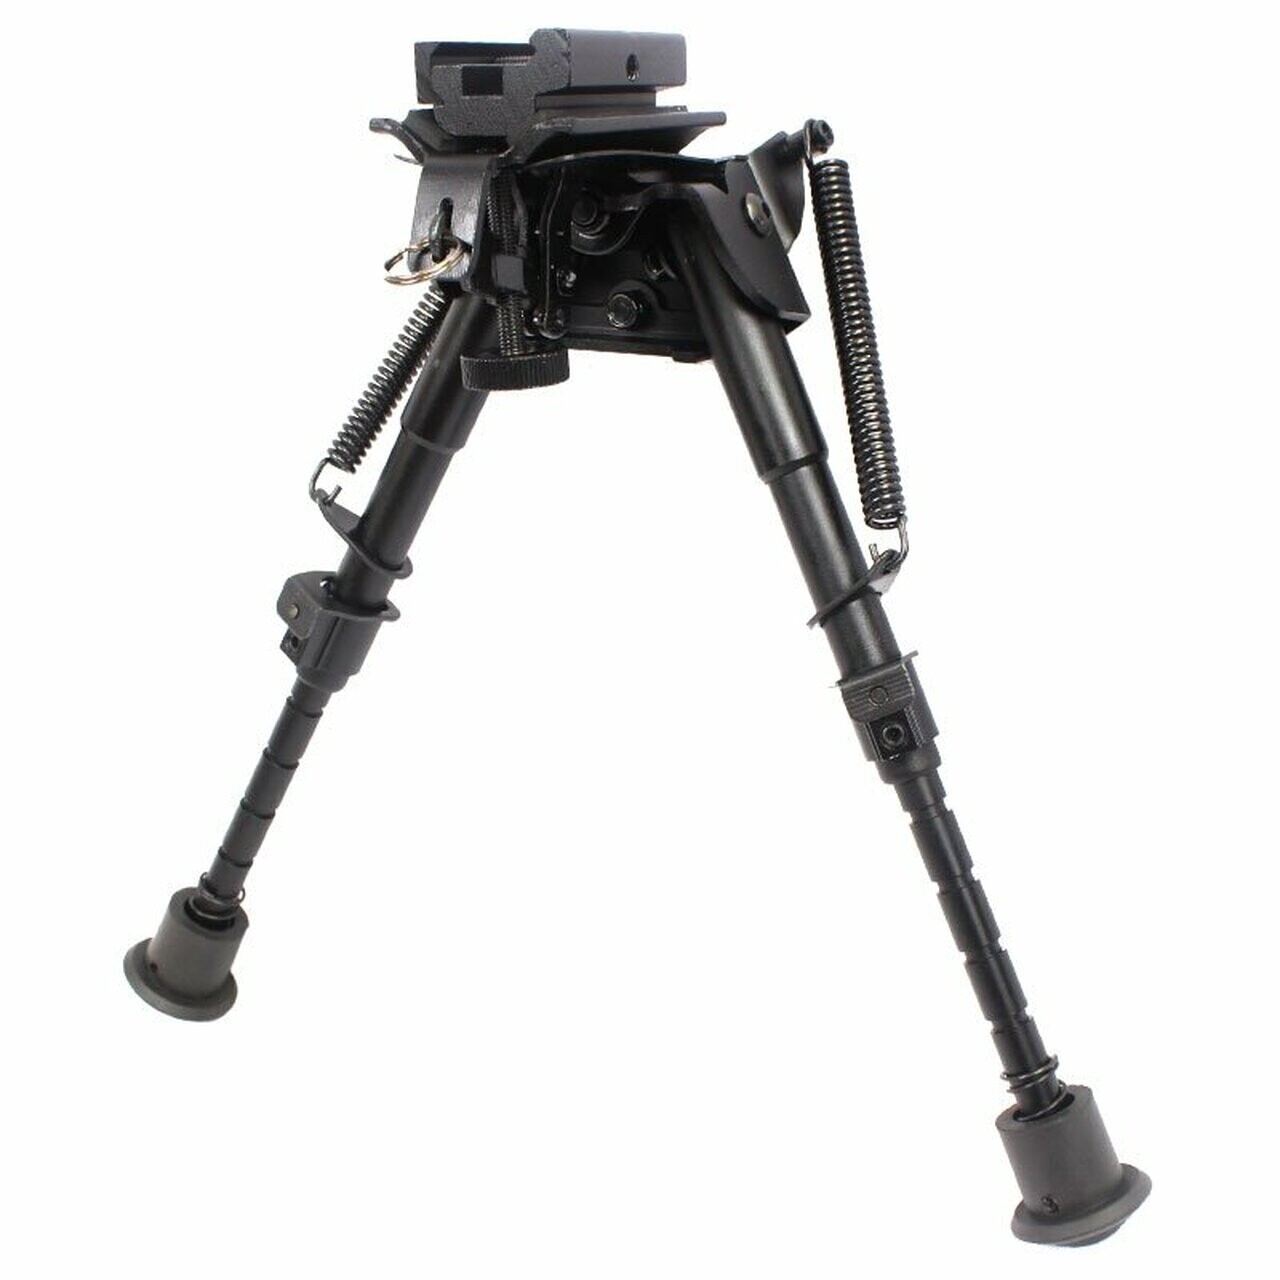 6" Collapsible Universal Bipod by KWS